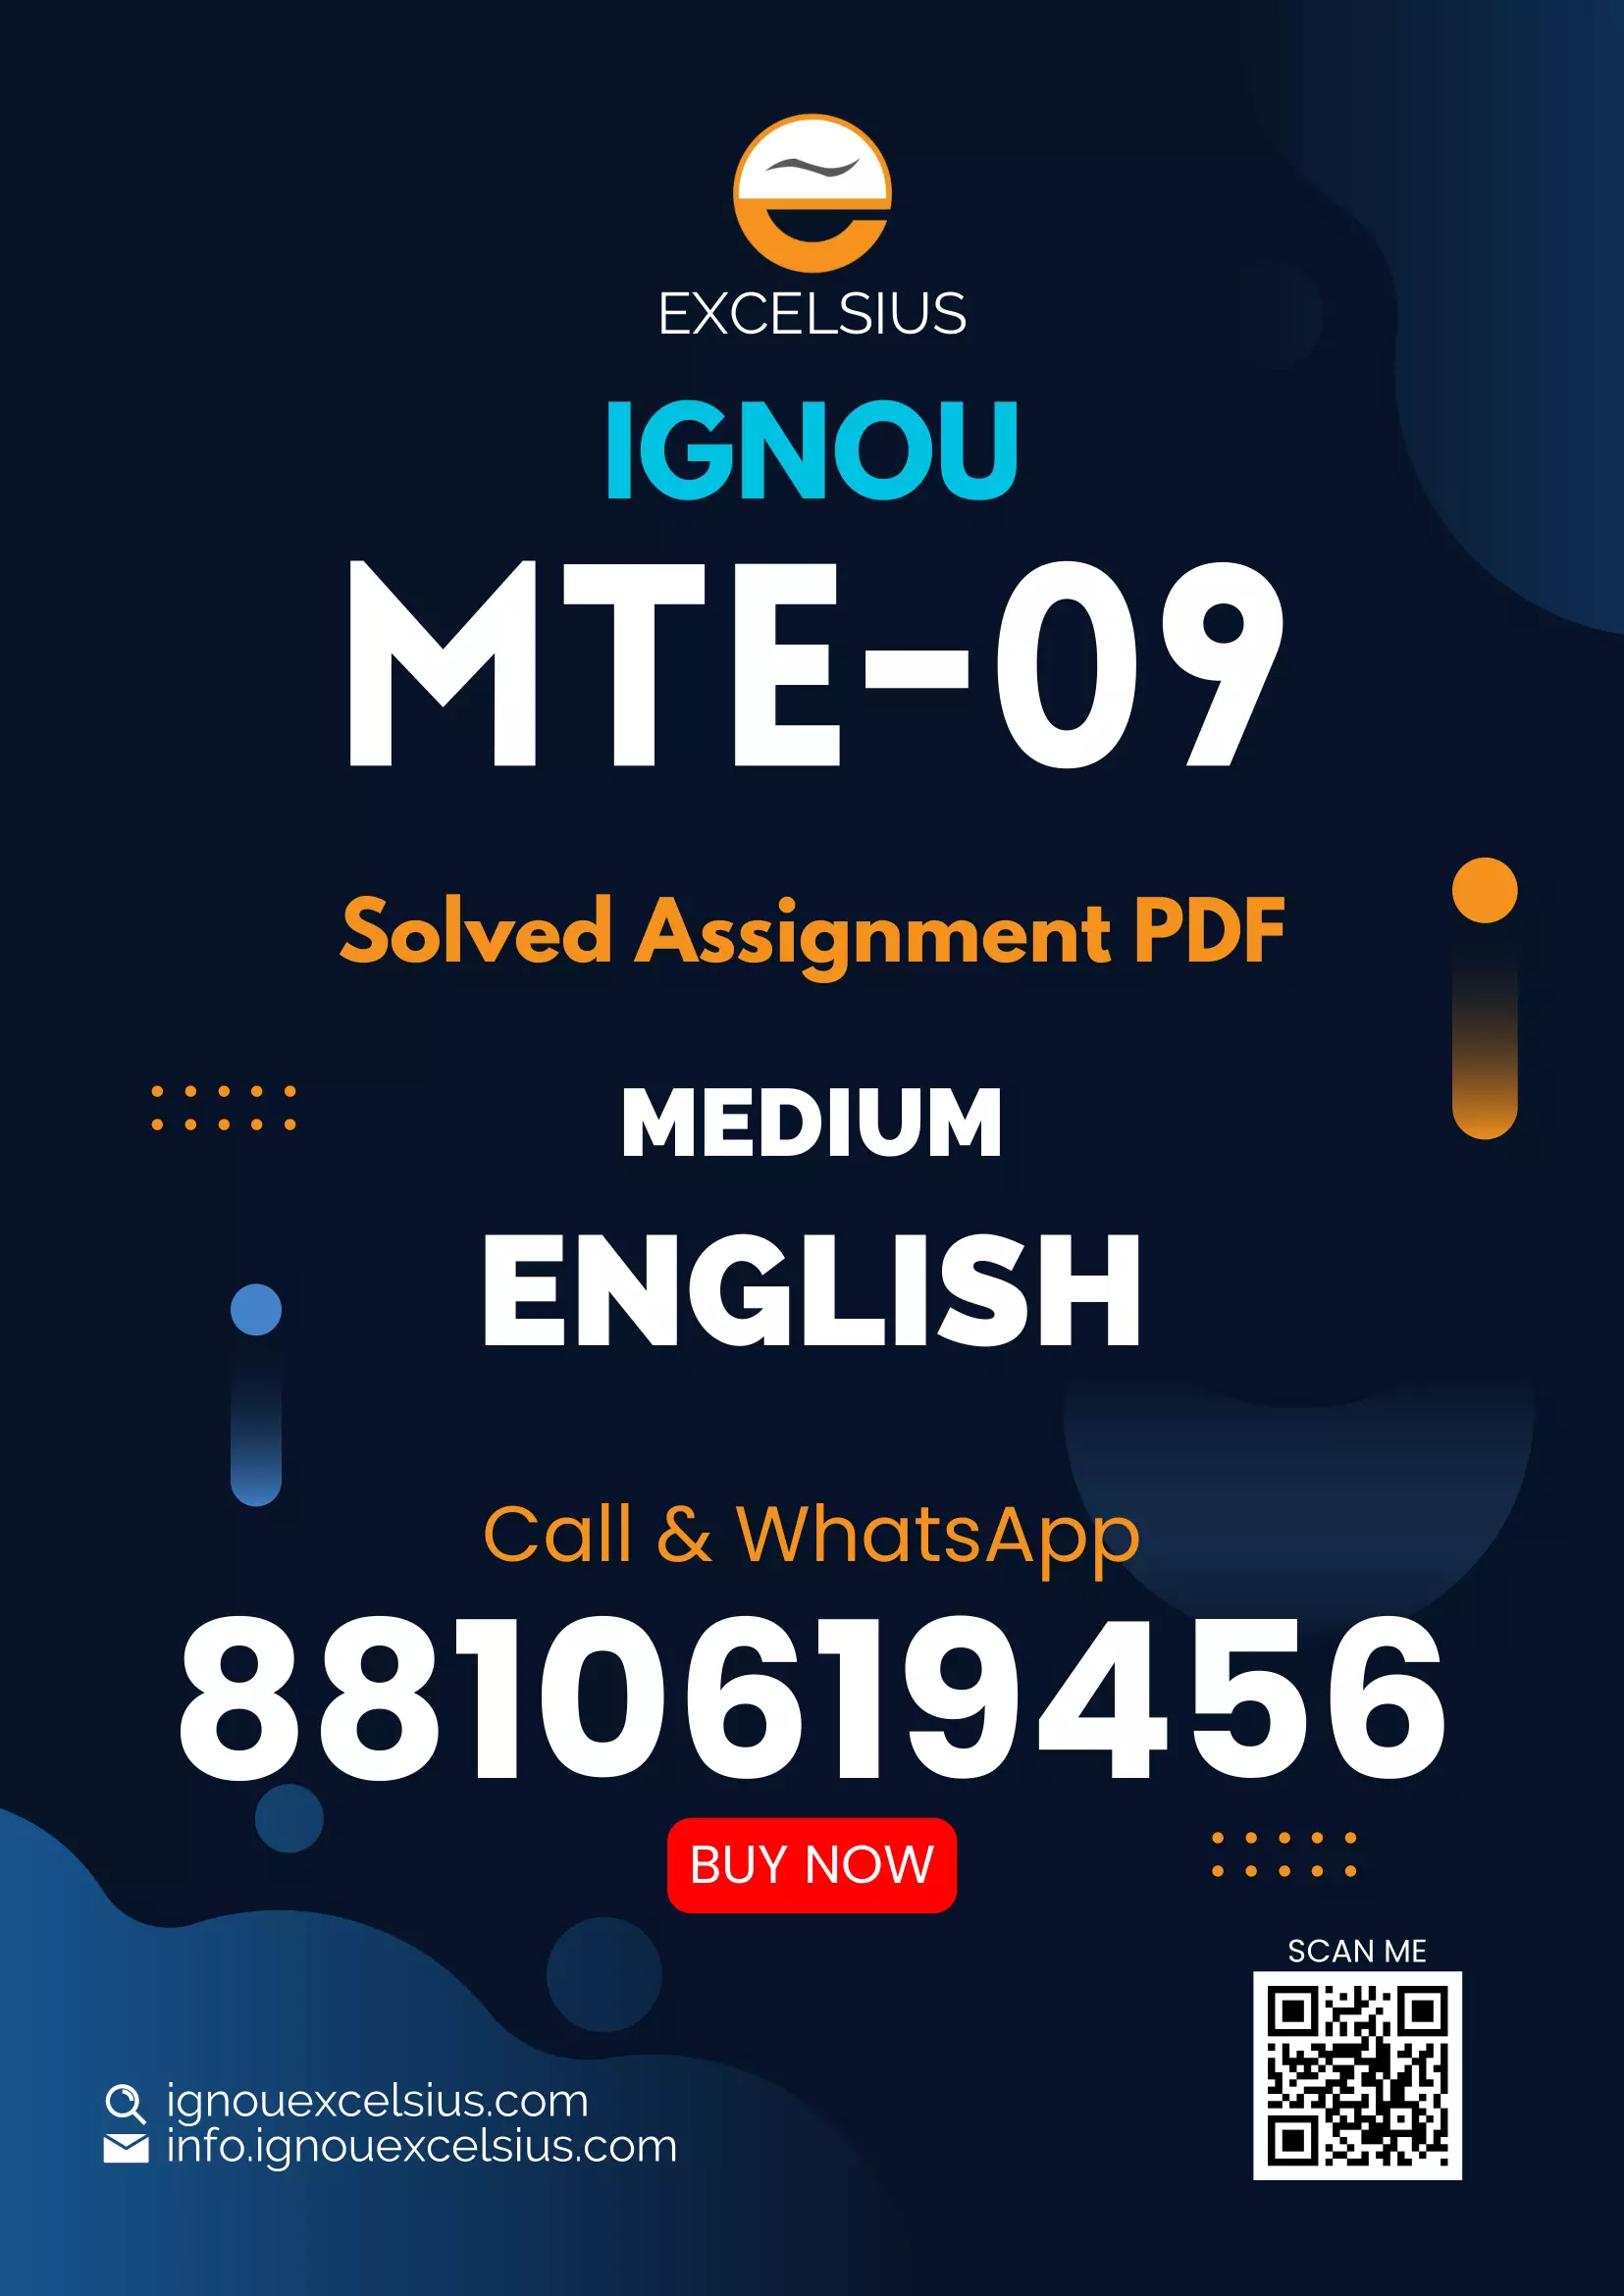 IGNOU MTE-09 - Real Analysis, Latest Solved Assignment-January 2023 - December 2023